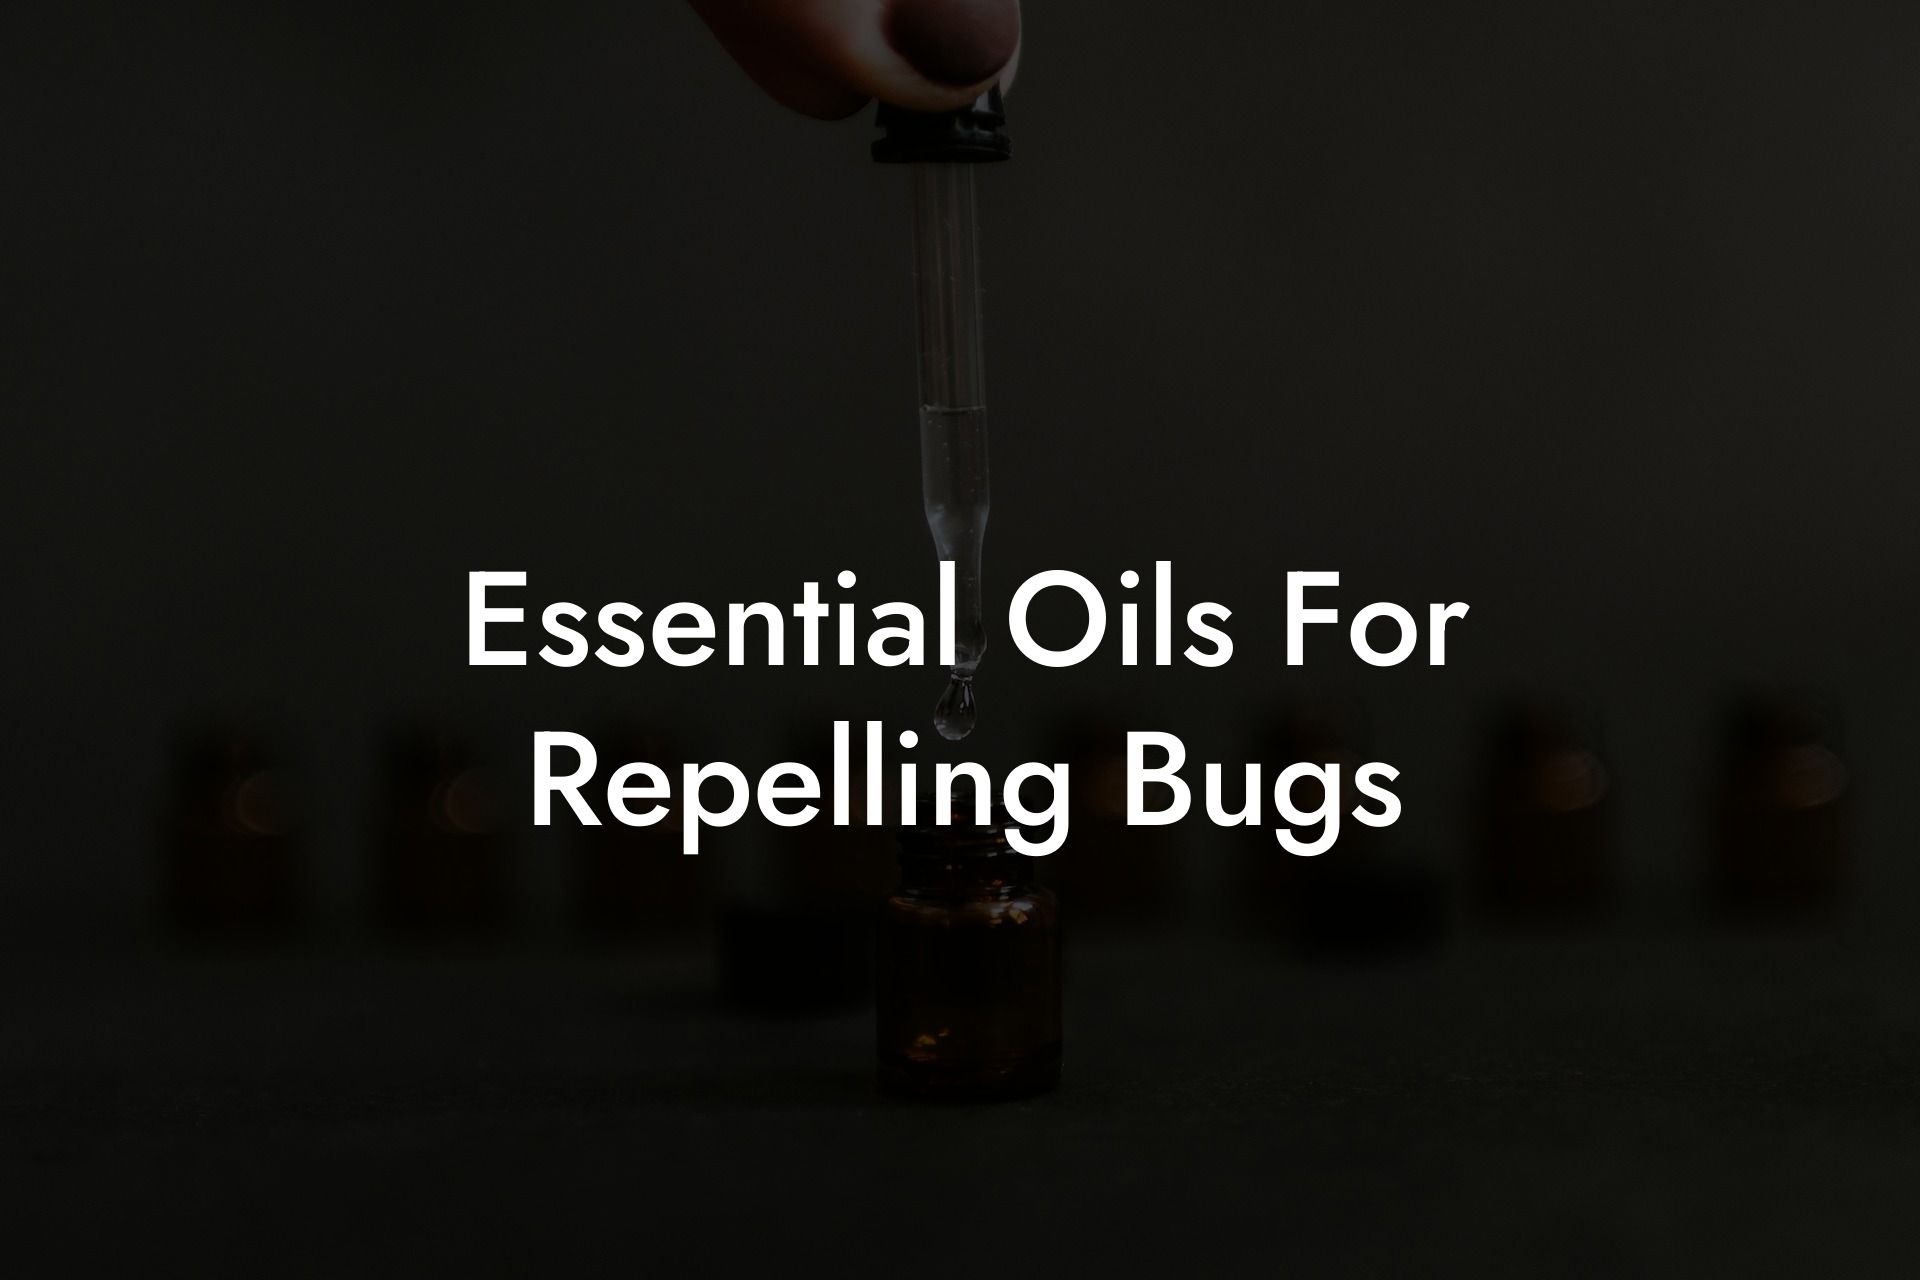 Essential Oils For Repelling Bugs